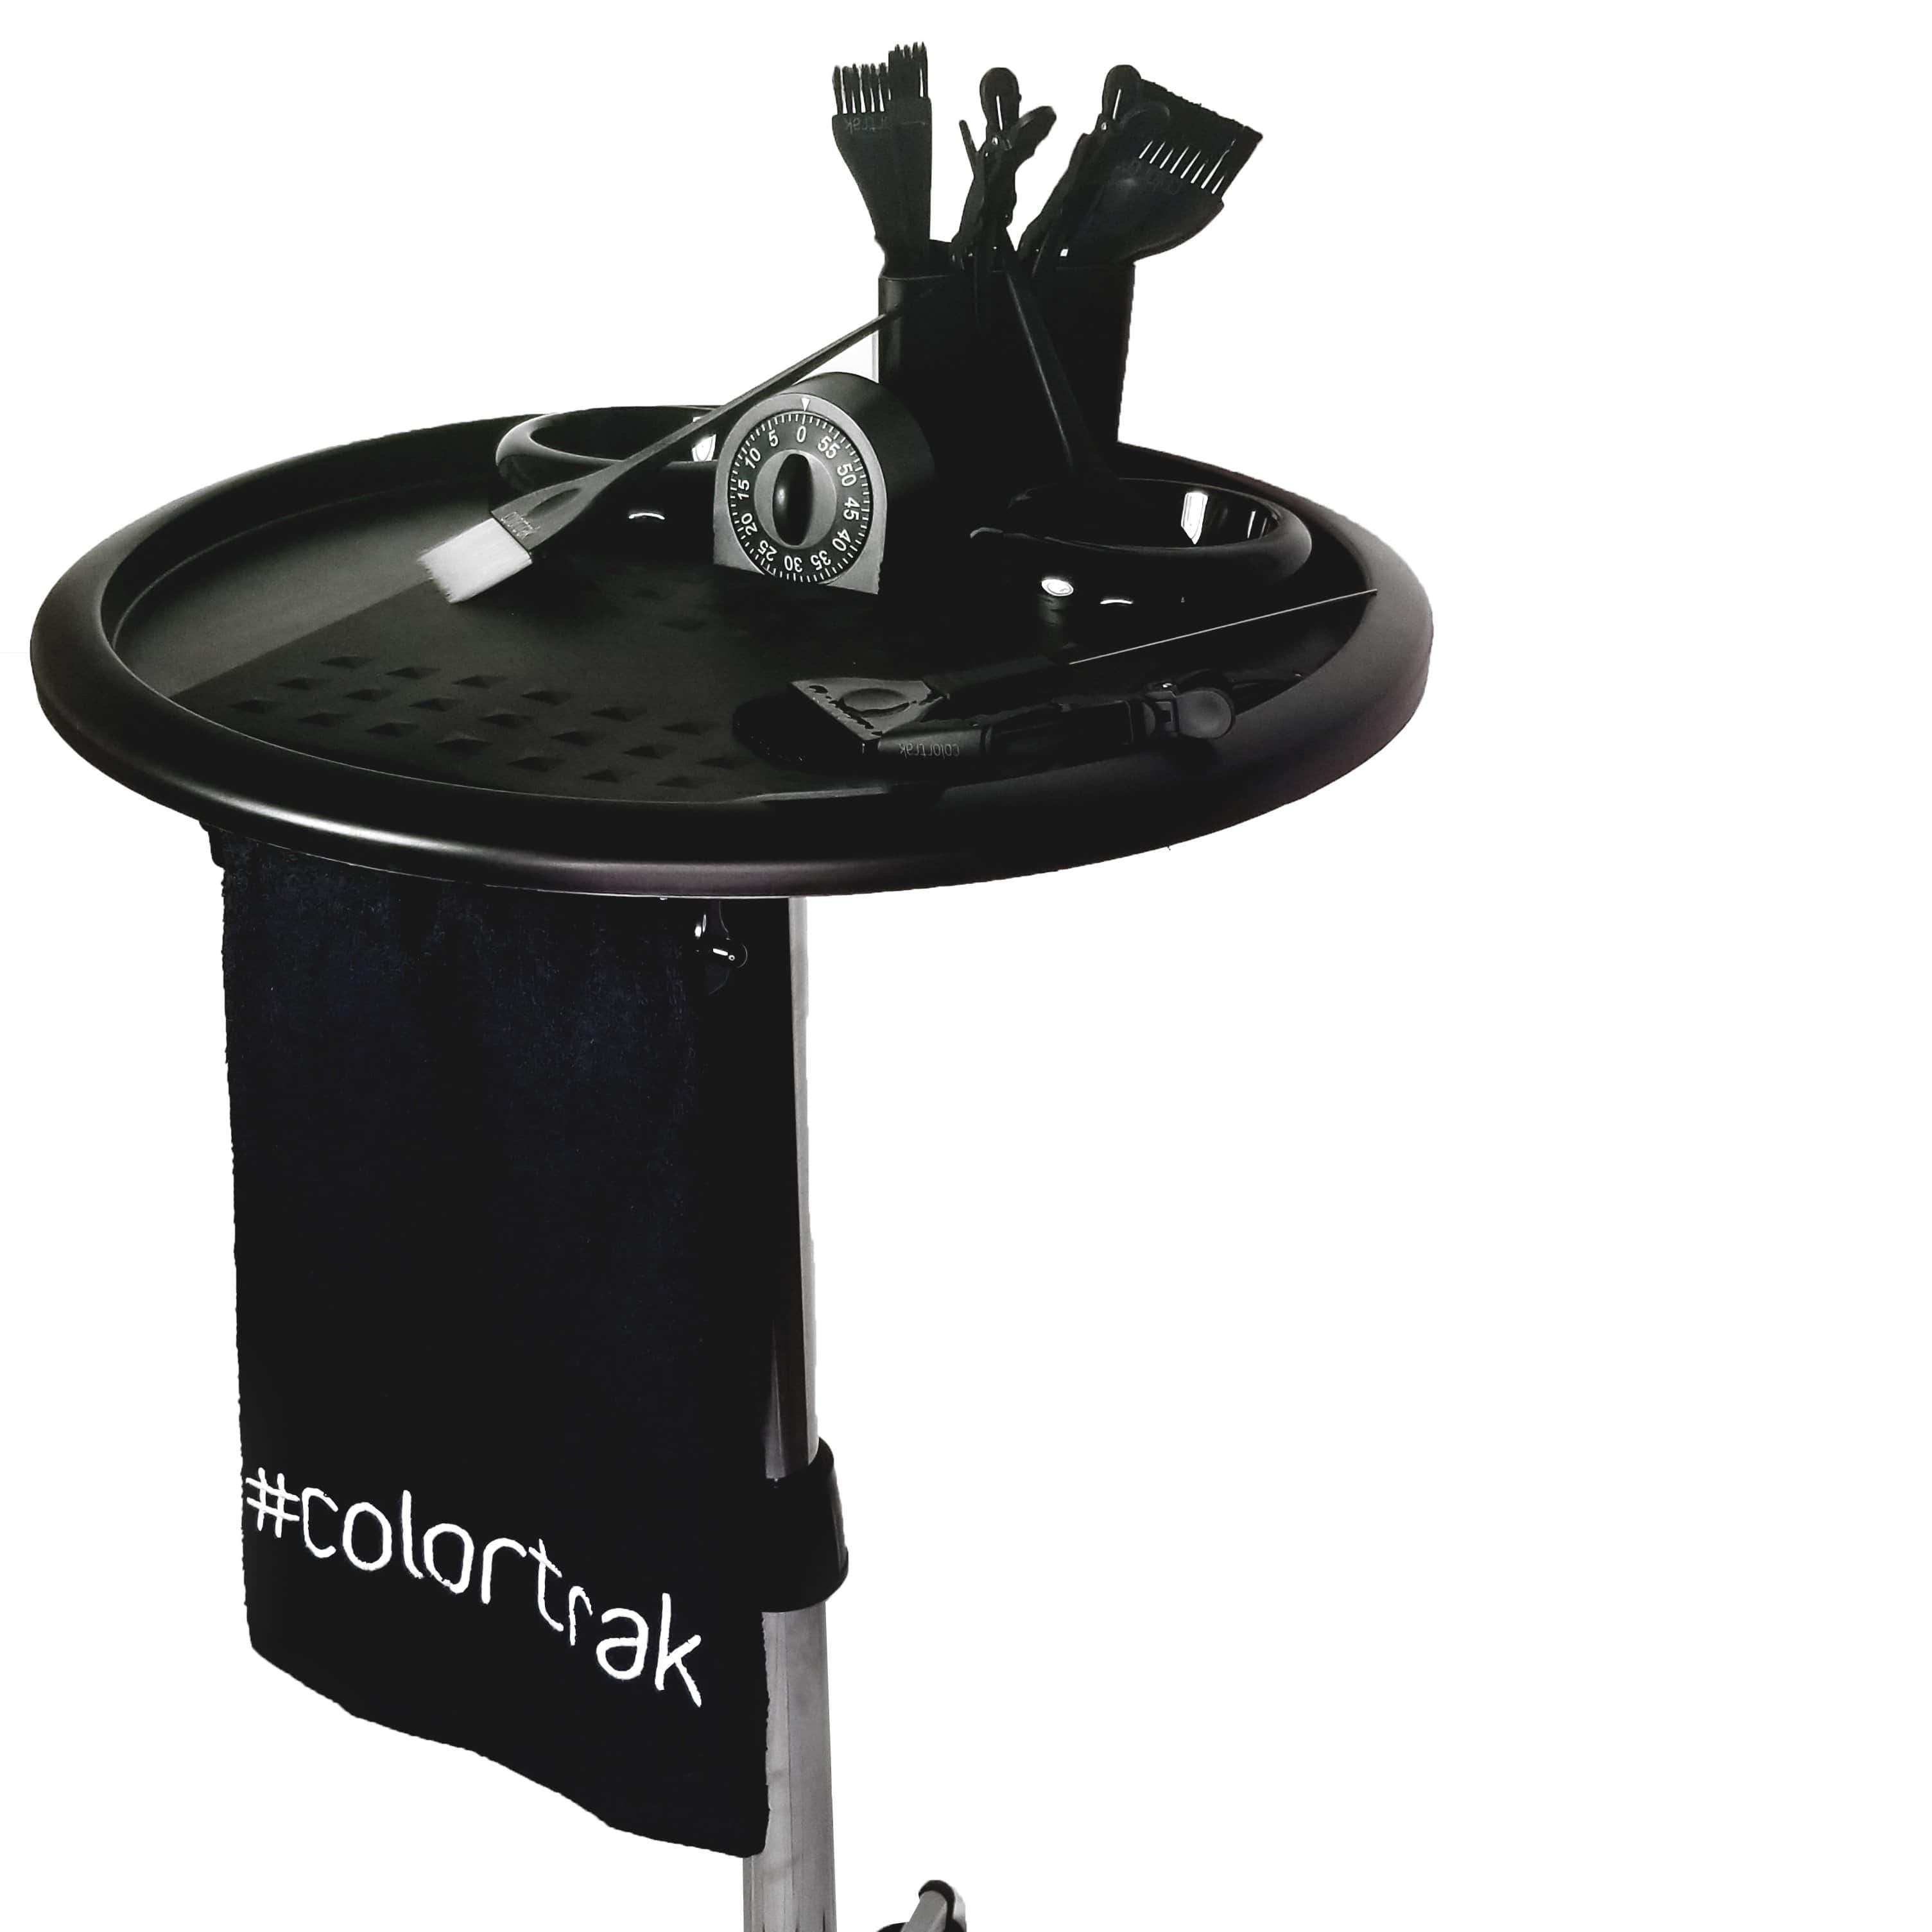 Salon Tray with Bleach-Proof Towel | Colortrak Bleach-Proof Salon Towel on Rack Color Station